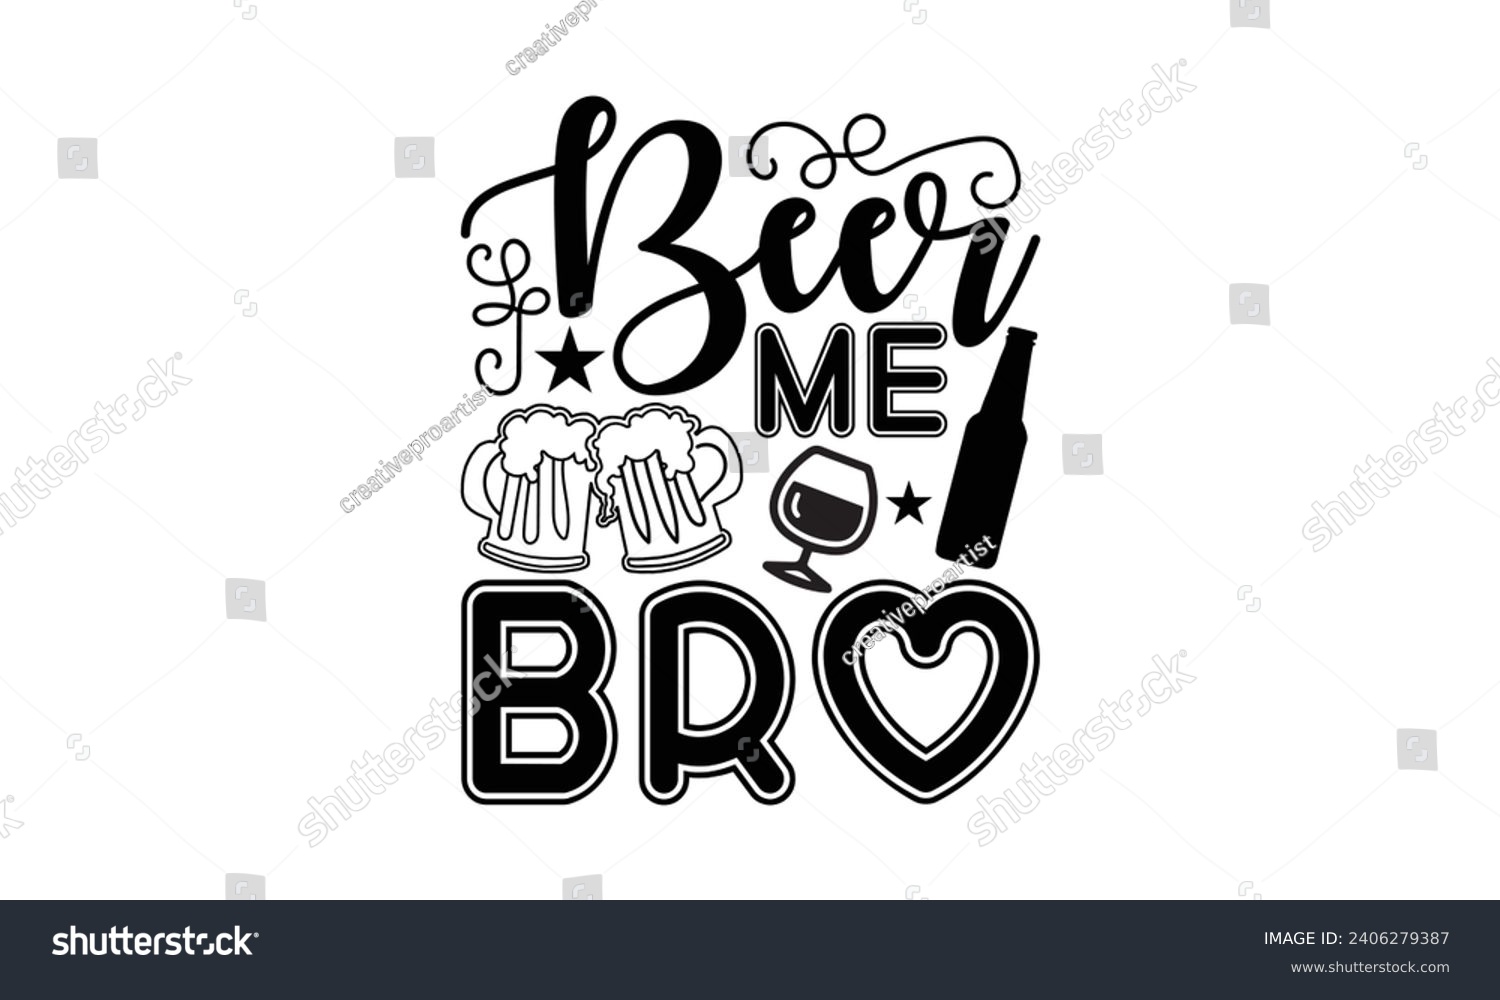 SVG of Beer Me Bro- Beer t- shirt design, Handmade calligraphy vector illustration for Cutting Machine, Silhouette Cameo, Cricut, Vector illustration Template. svg